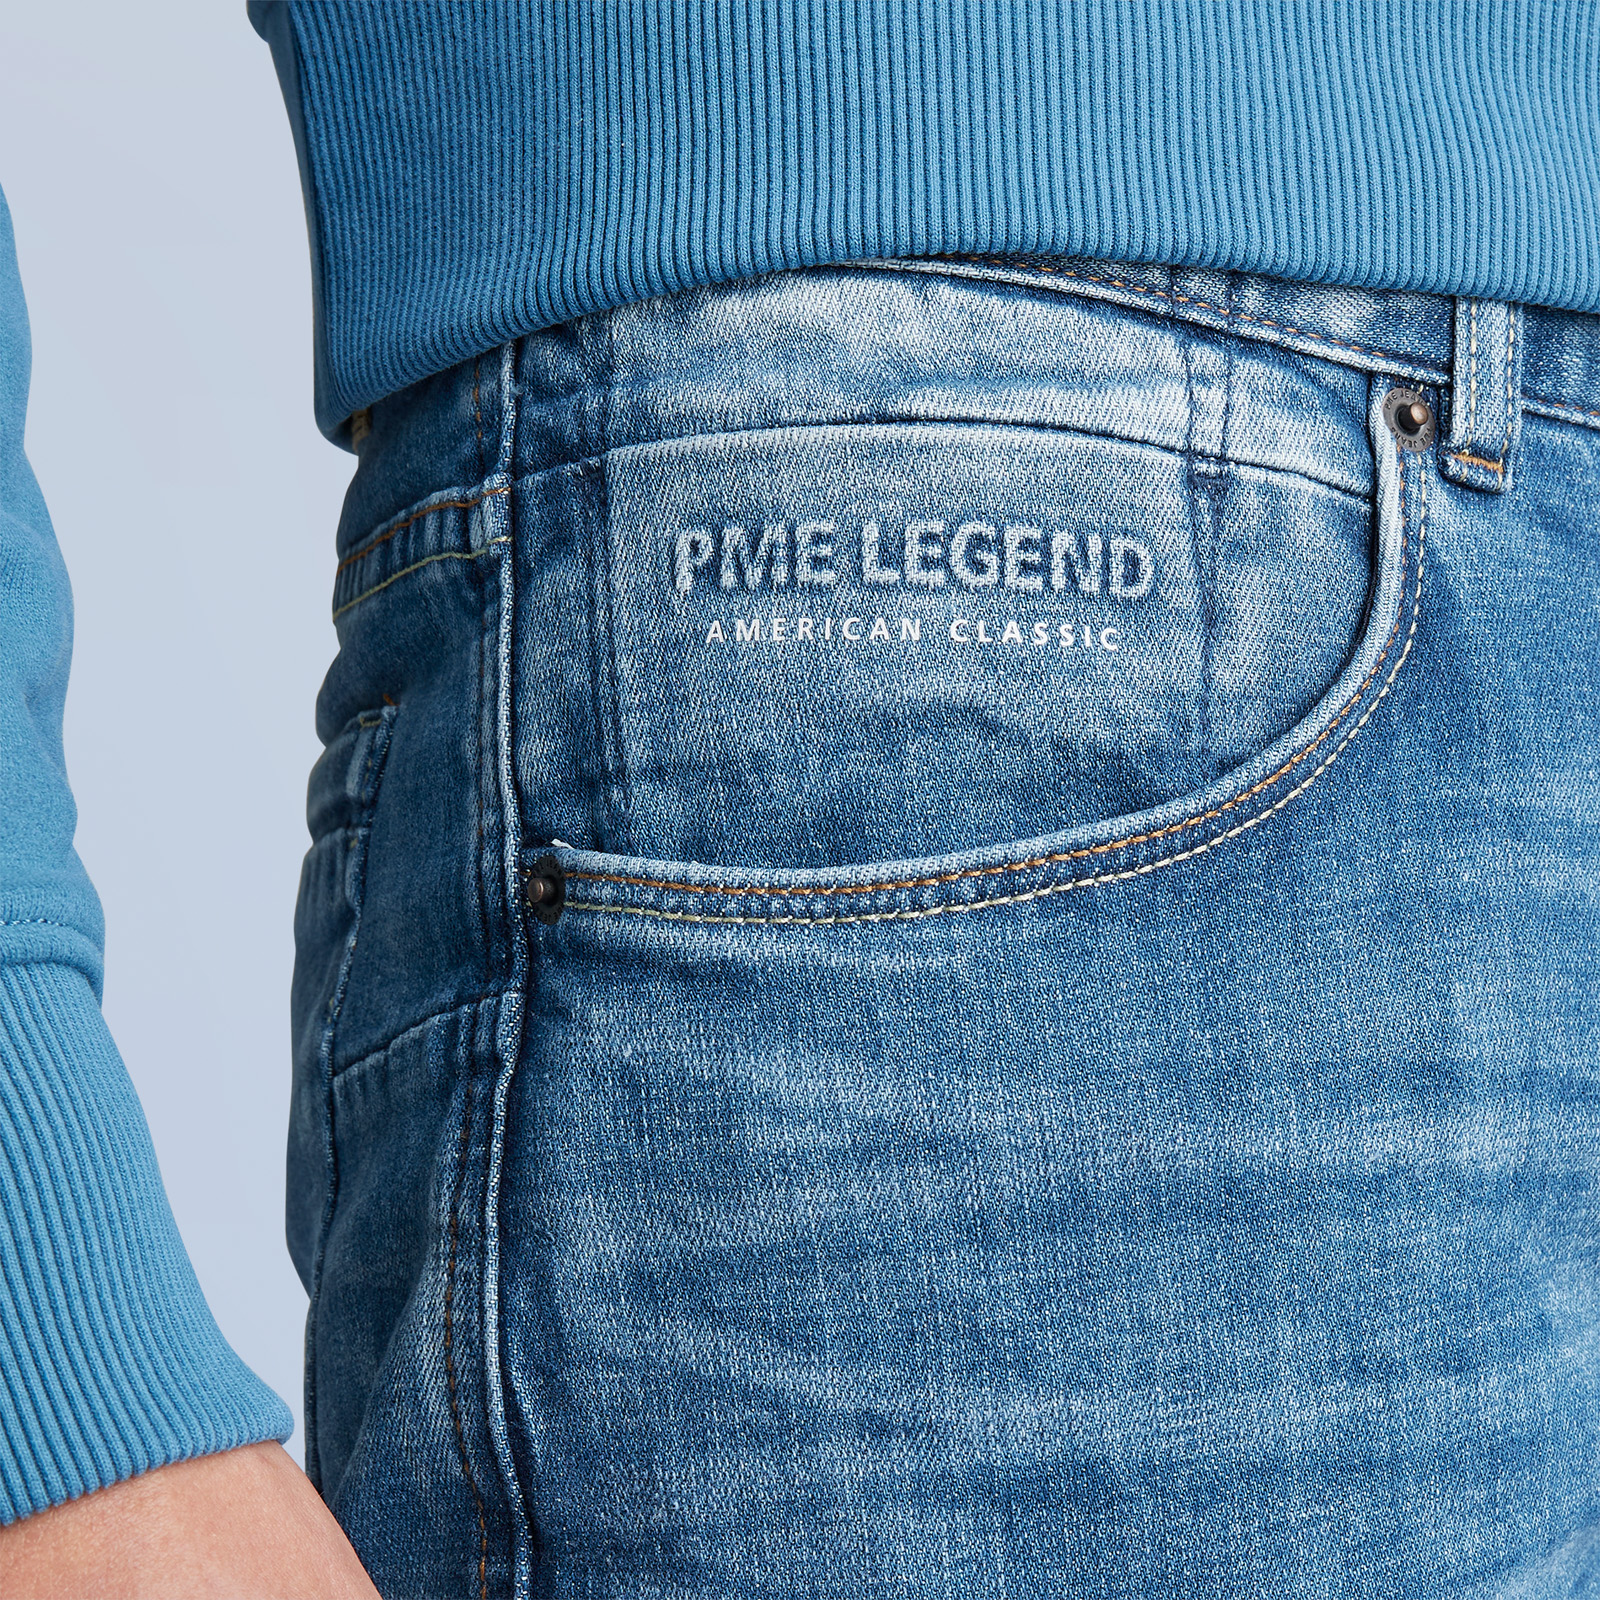 Vleugels Martin Luther King Junior logboek PME JEANS | PME Legend Nightflight jeans | Free shipping and returns